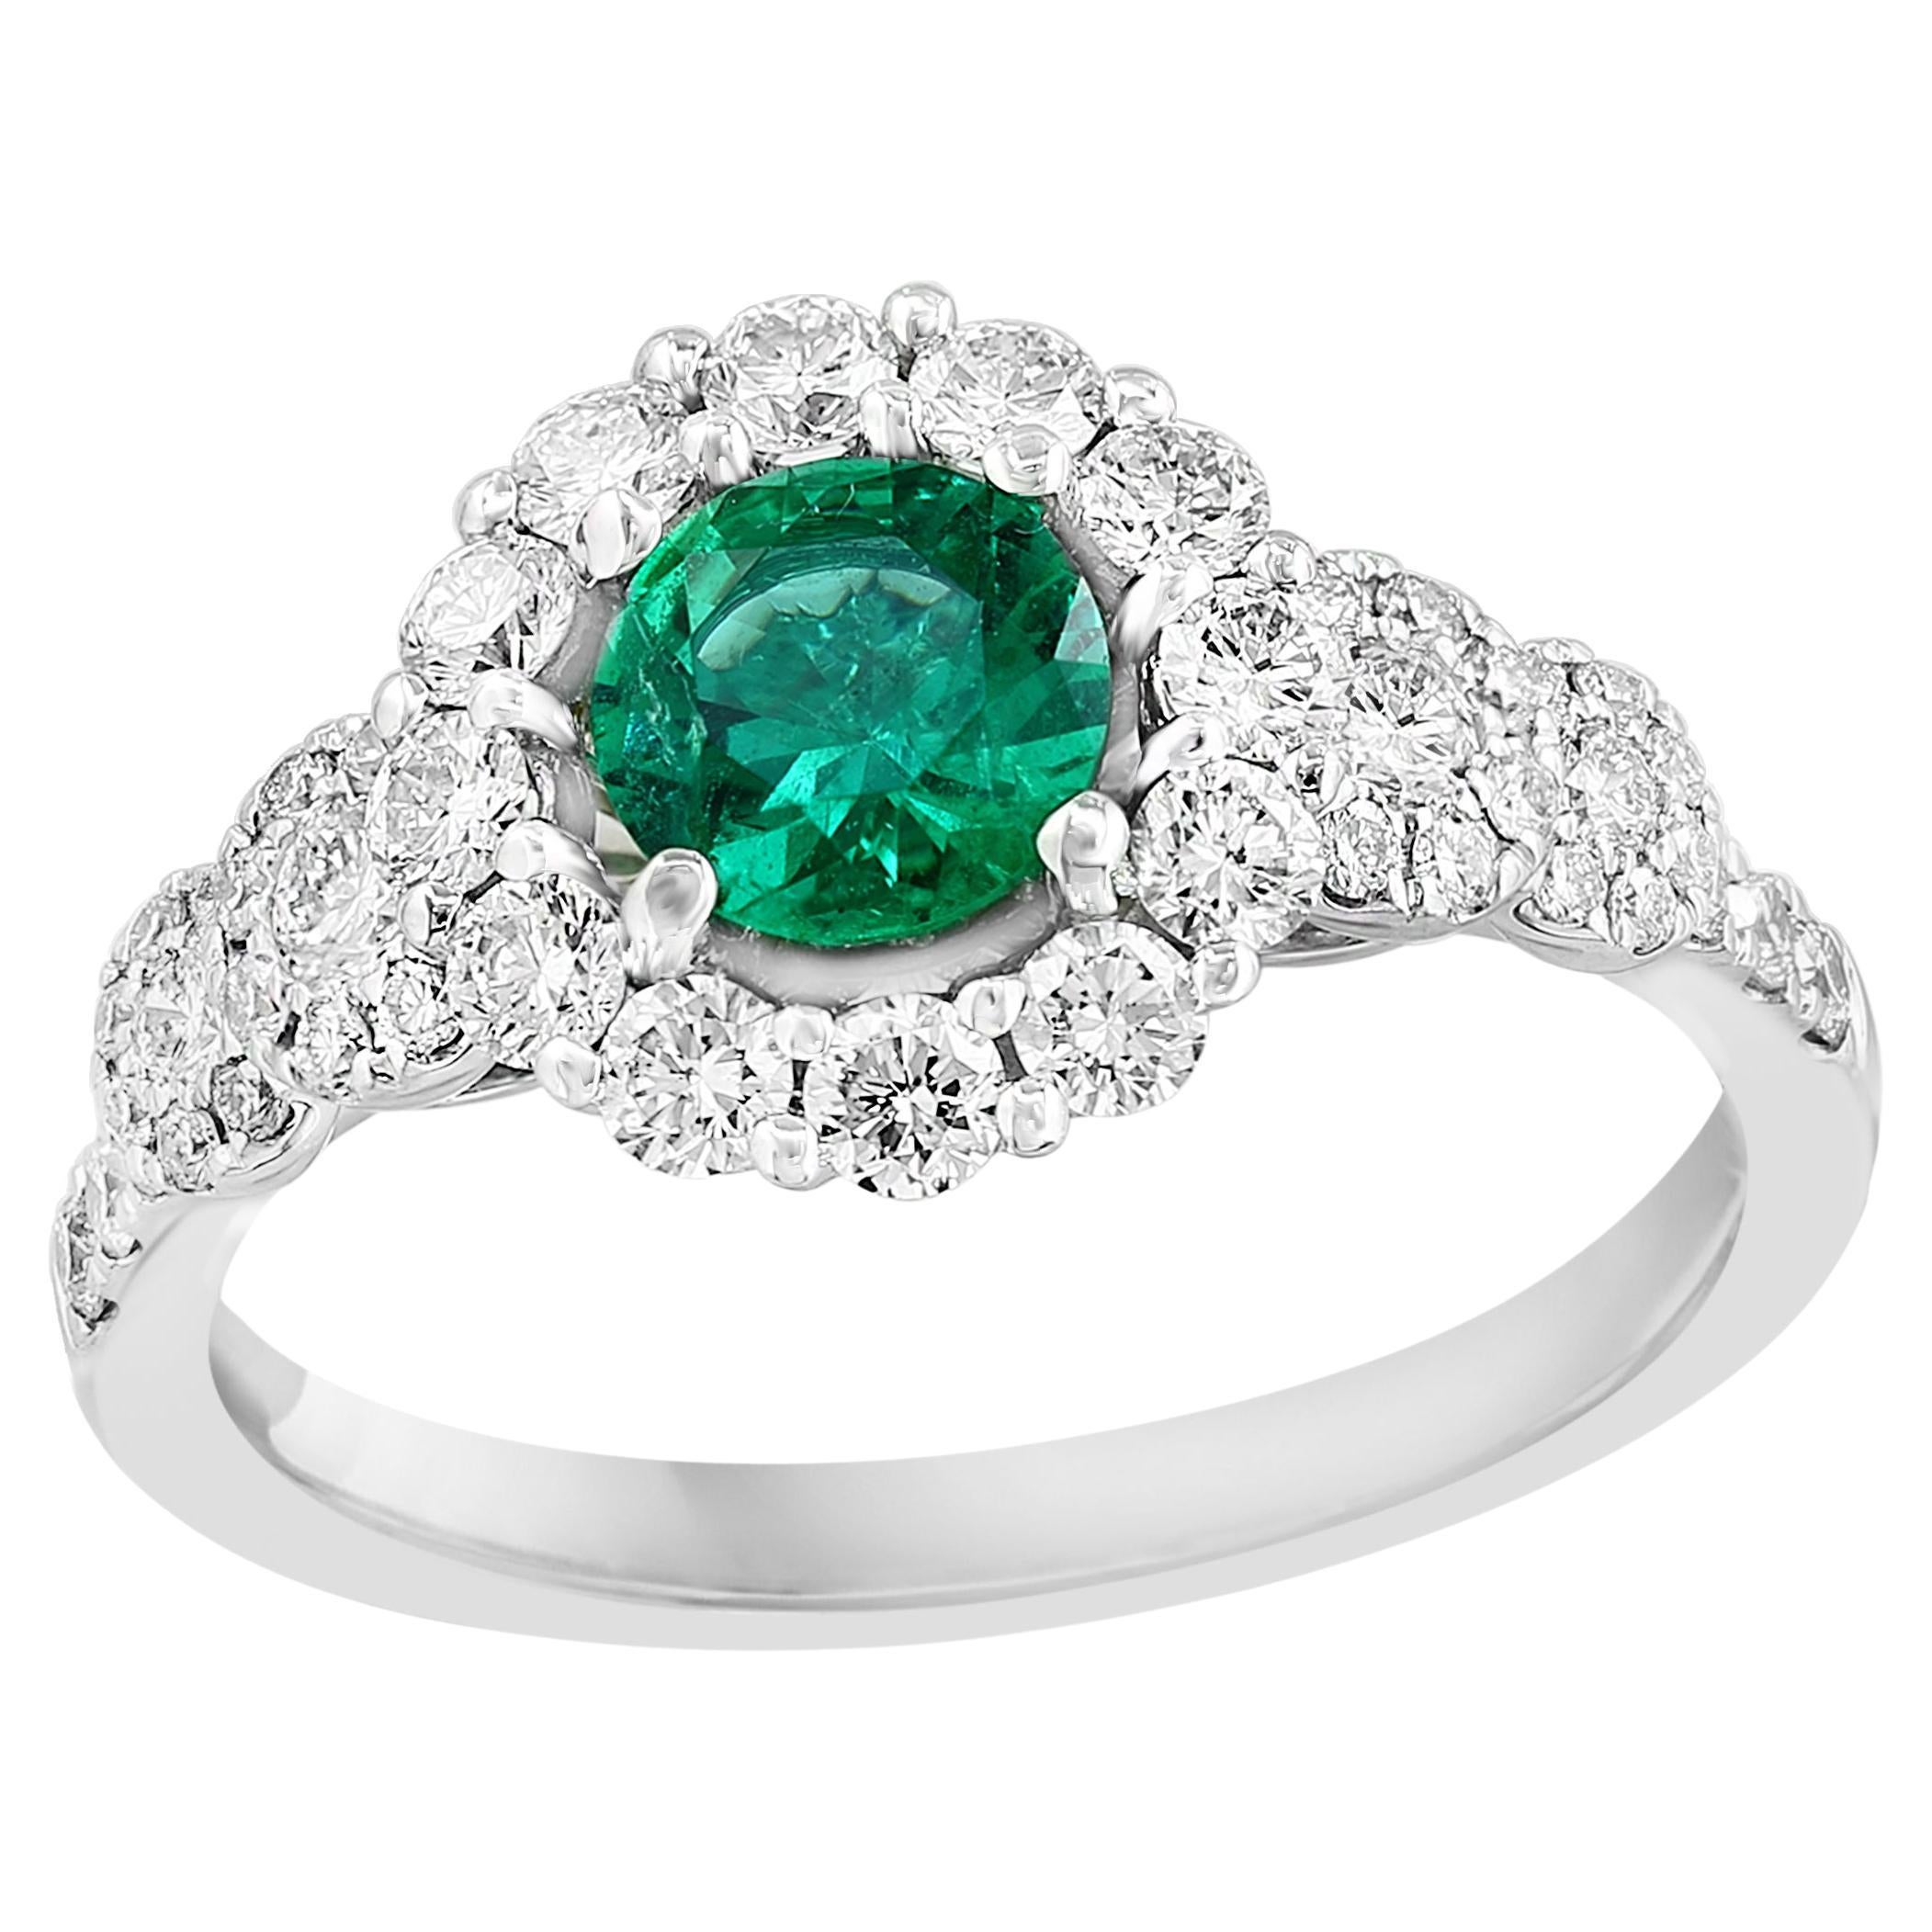 0.62 Carat Round Cut Emerald and Diamond Fashion Ring in 18k White Gold For Sale